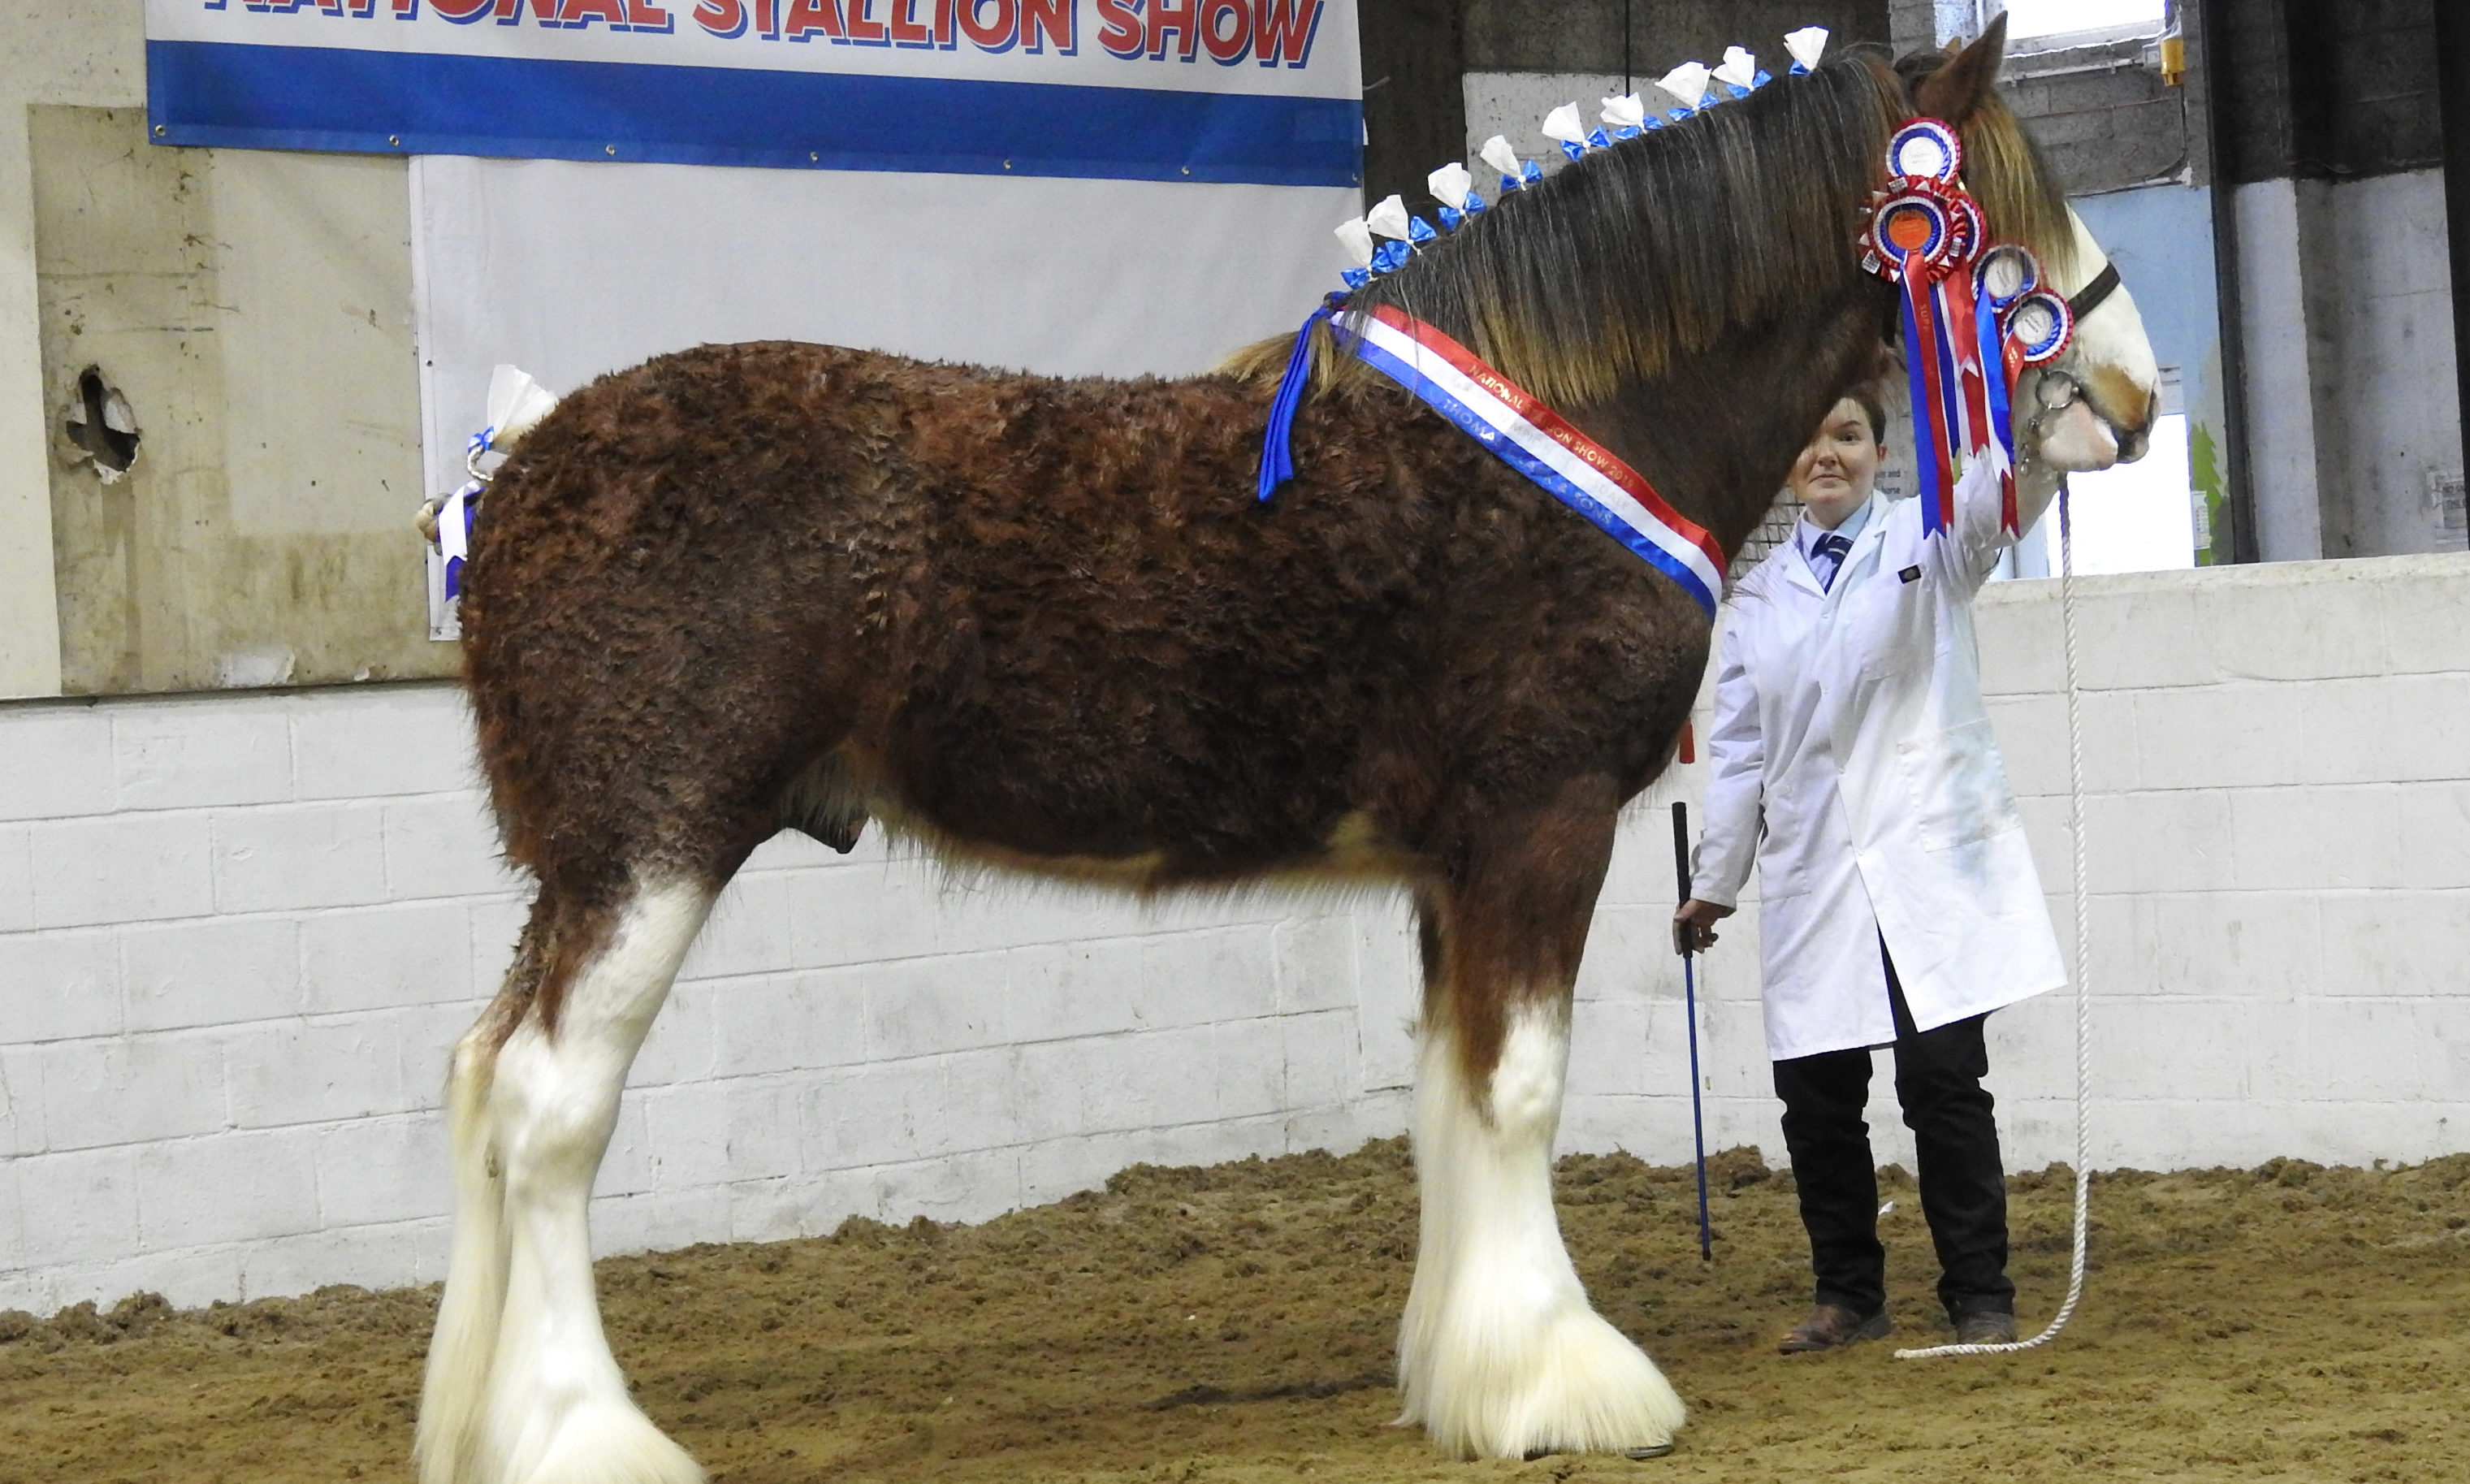 National Stallion Show Clydesdale colt has the Magic Touch to take the